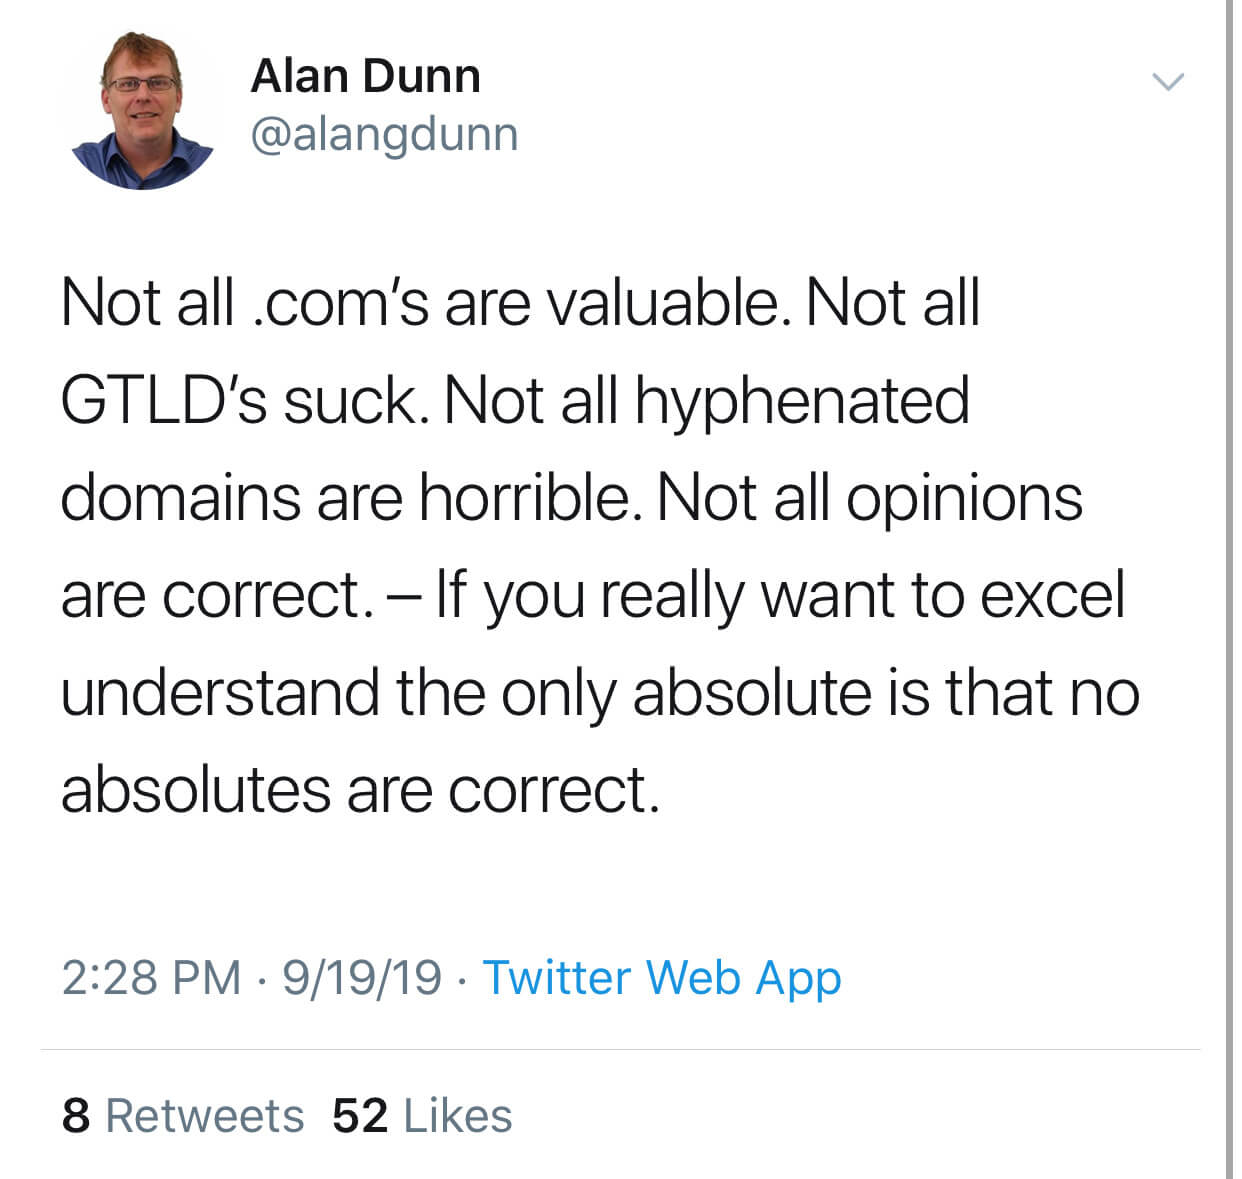 Not all .com’s are valuable. Not all GTLD’s suck. Alan Dunn tells it like it is in this tweet.